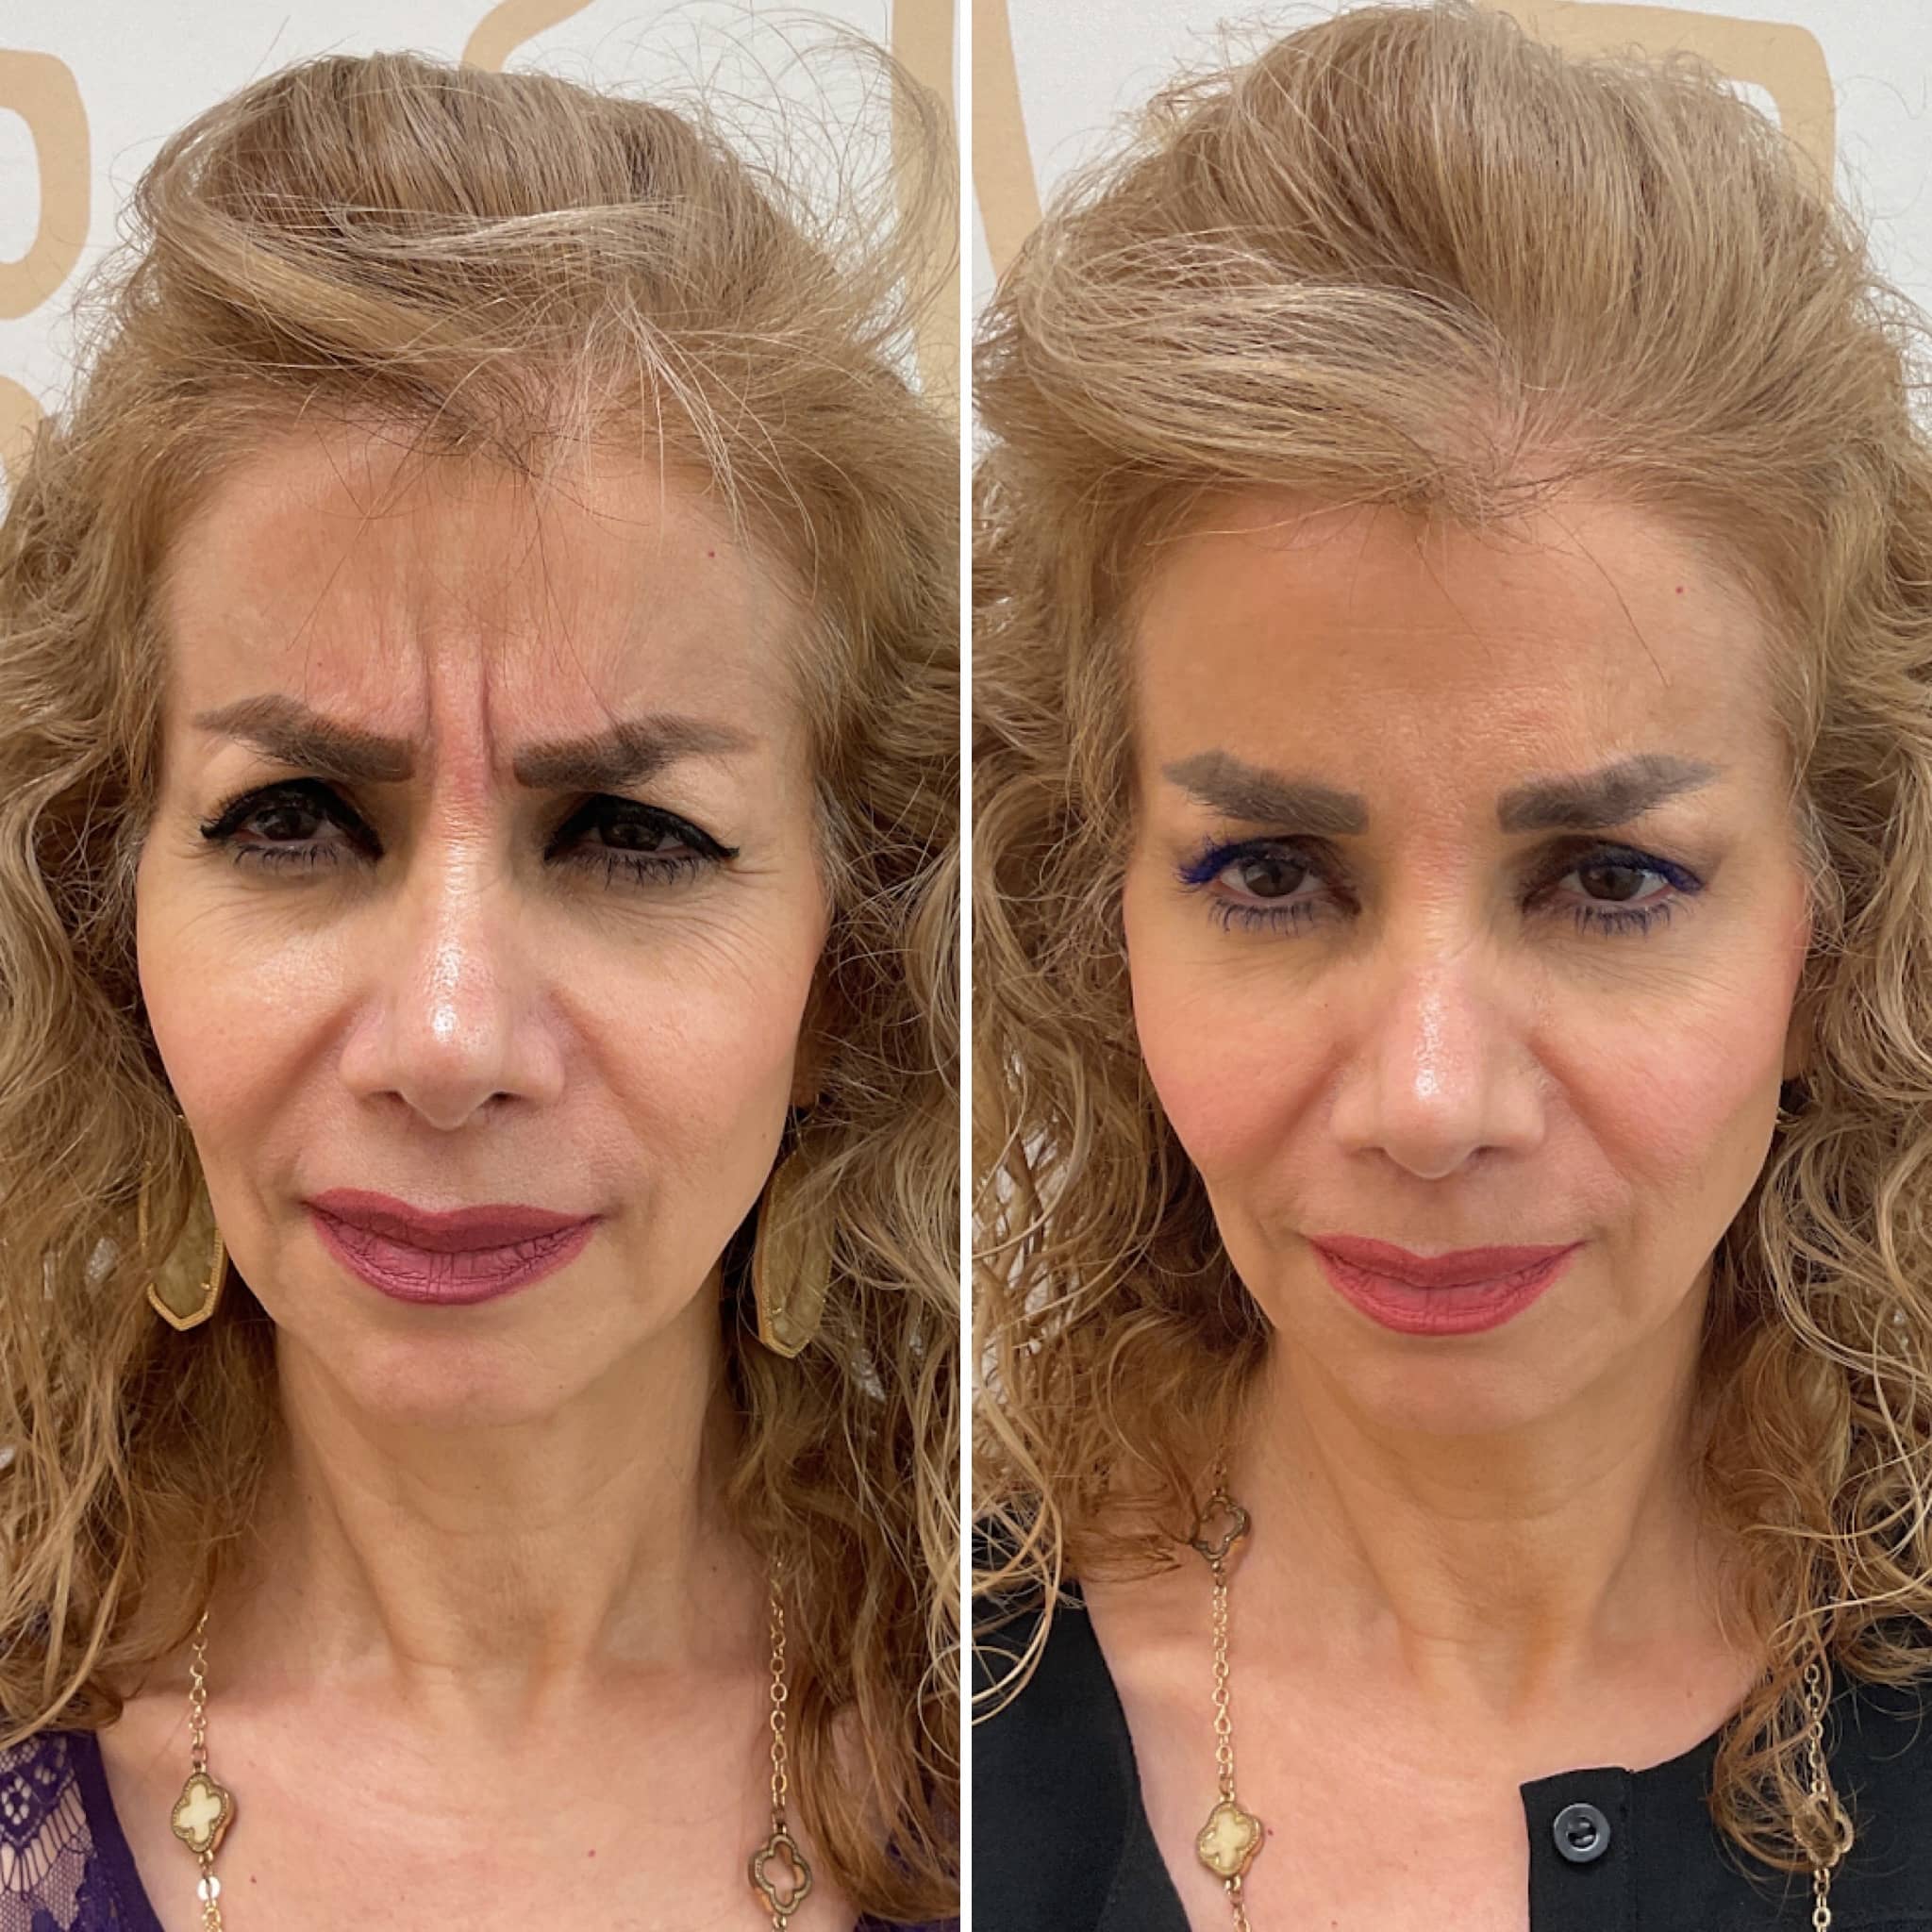 Treatment of wrinkles on the glabella using botulinum toxin